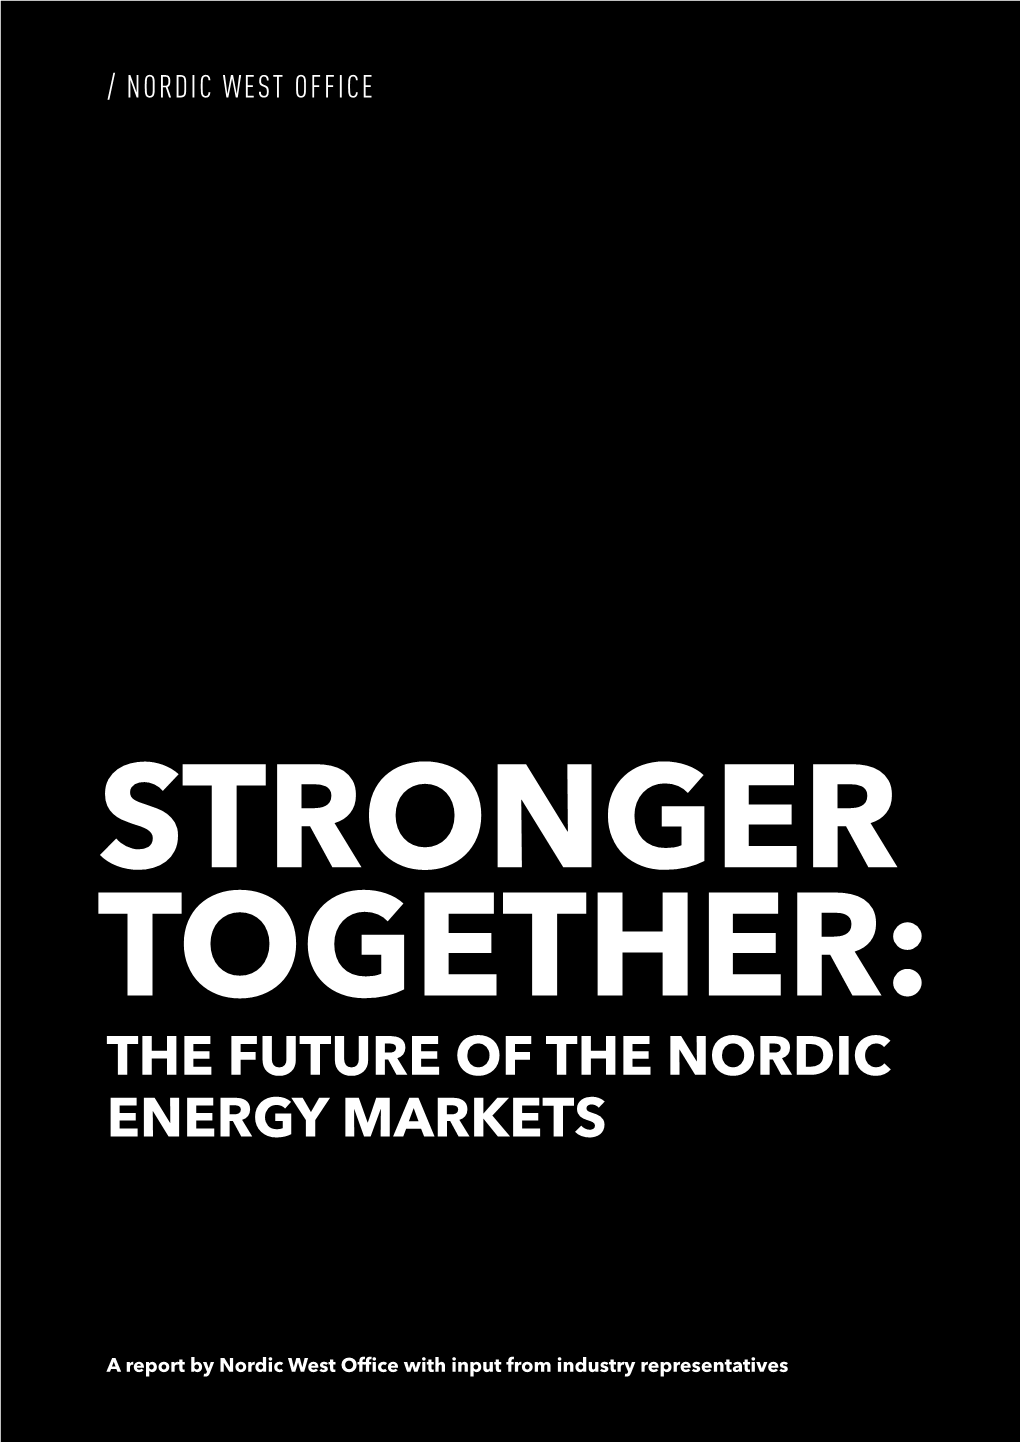 The Future of the Nordic Energy Markets